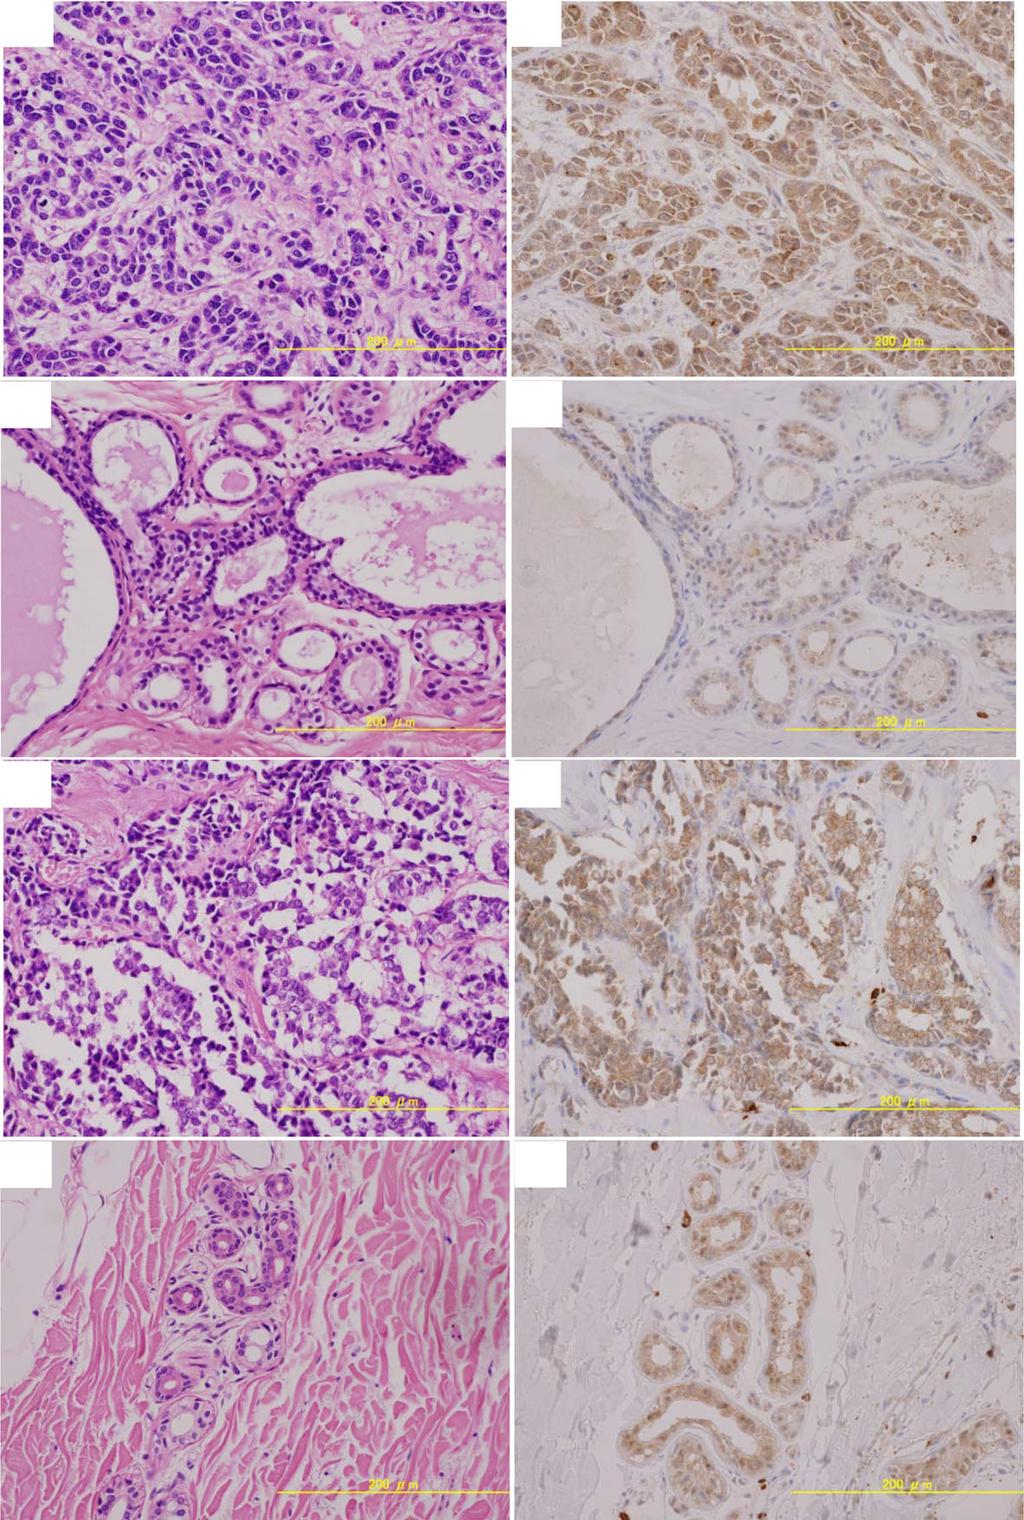 Yamashita et al. BMC Cancer (2017) 17:589 Page 14 of 21 a b c d e f g h Fig. 2 Immunostaining and HE staining of choline kinase in breast cancer and corresponding normal breast tissues.